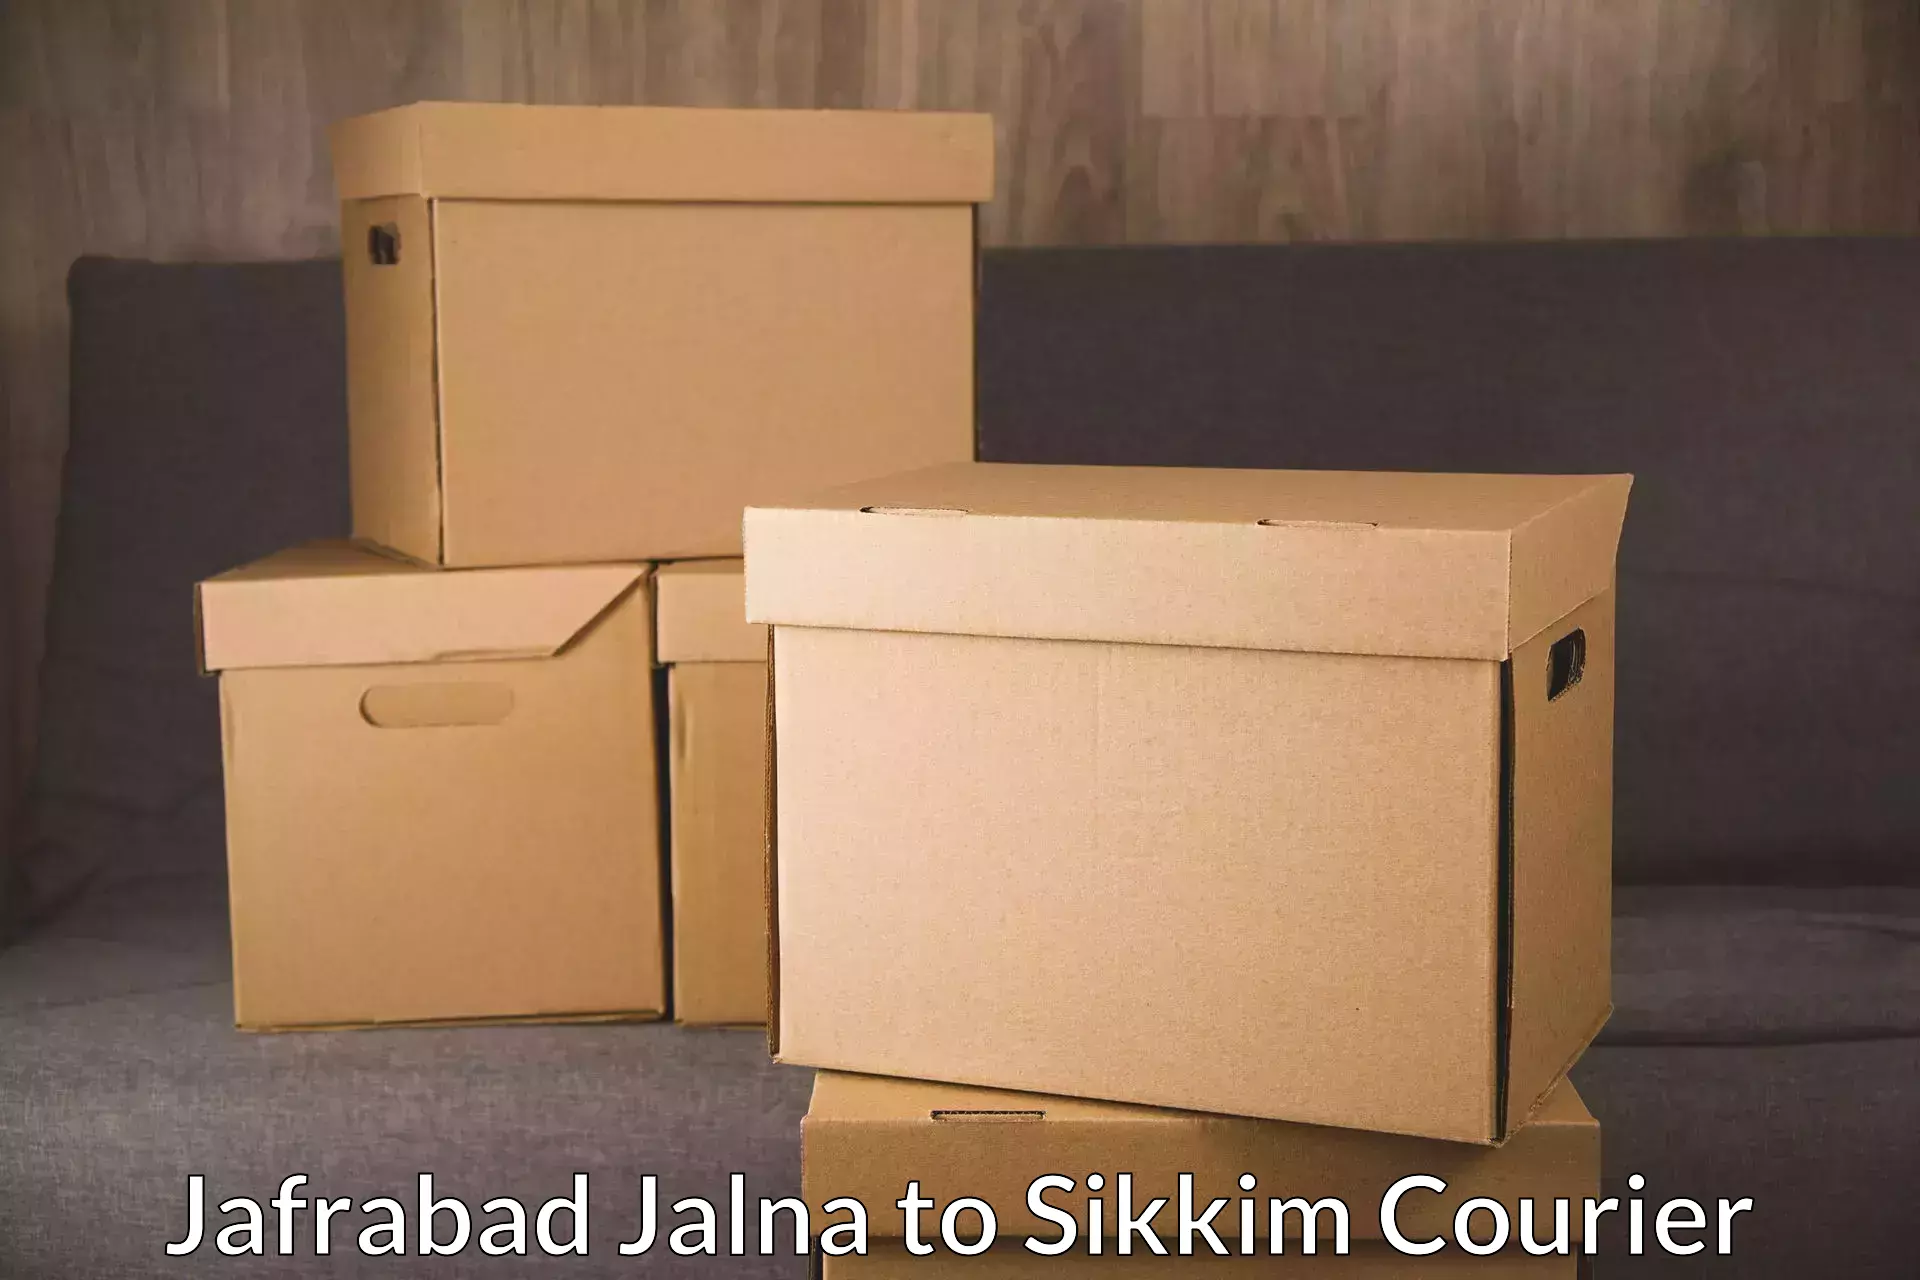 Full-service courier options Jafrabad Jalna to Mangan